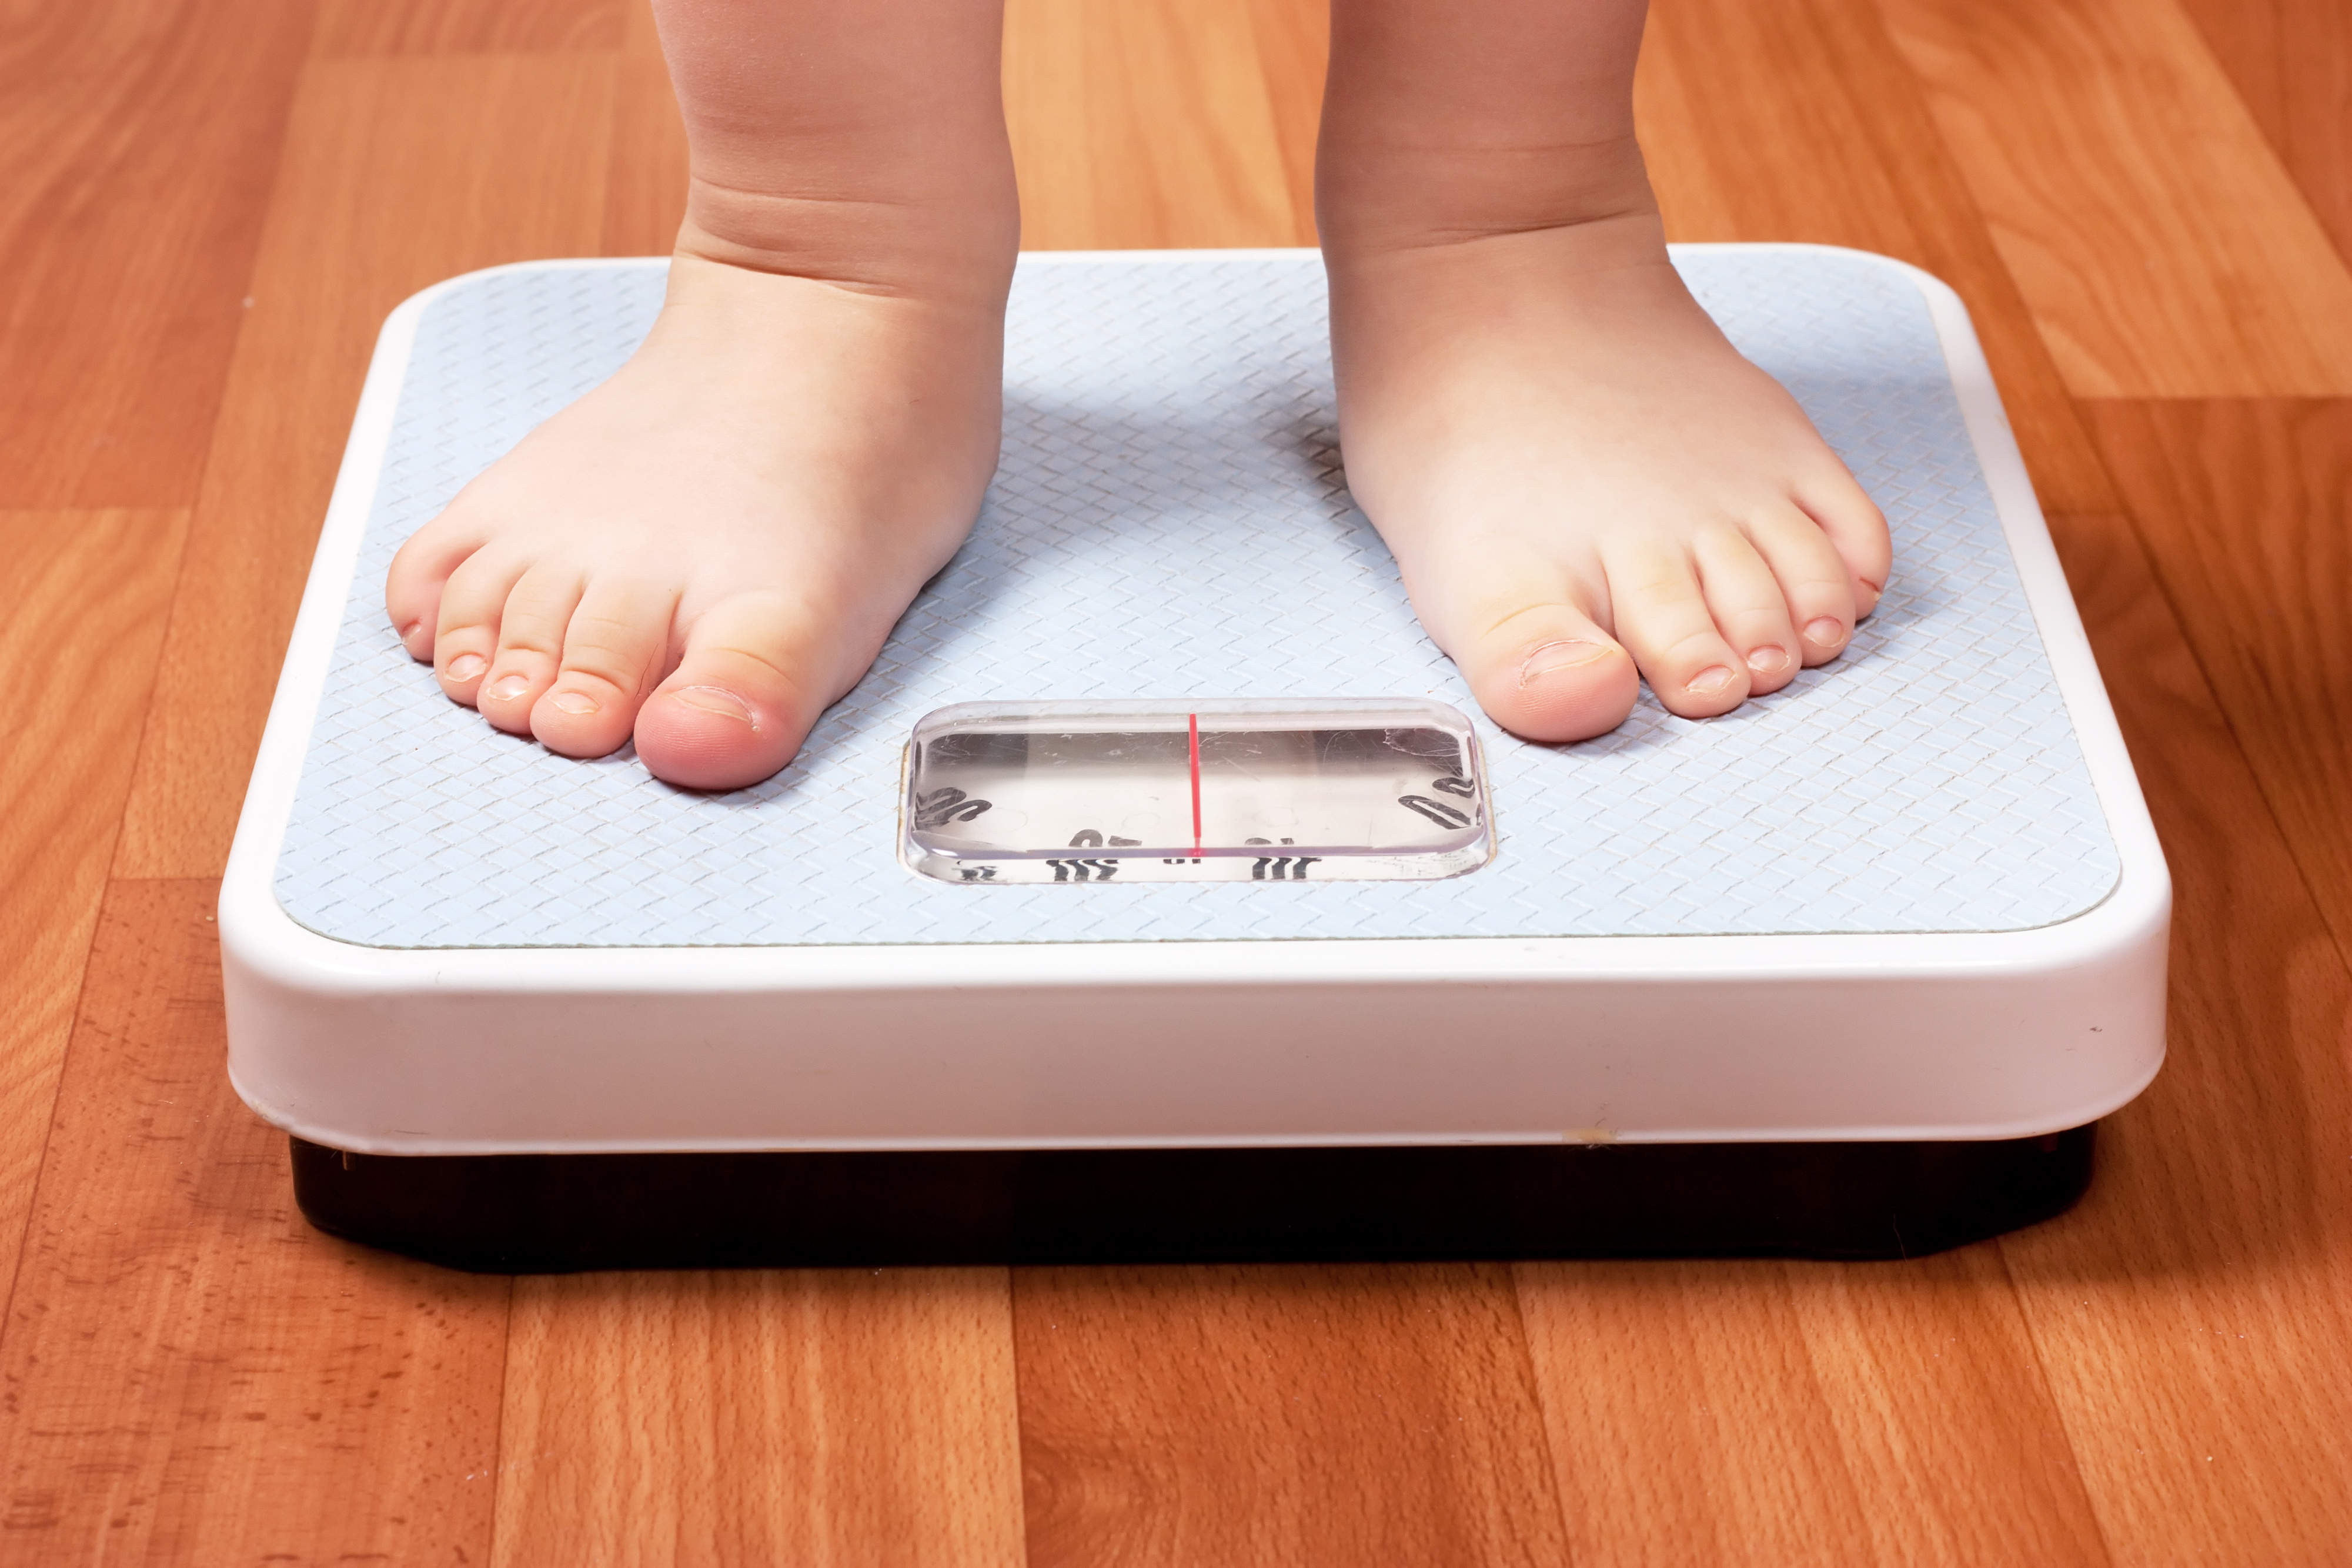 Tackling childhood obesity - will measures suggested by the UK government this week be enough to help?